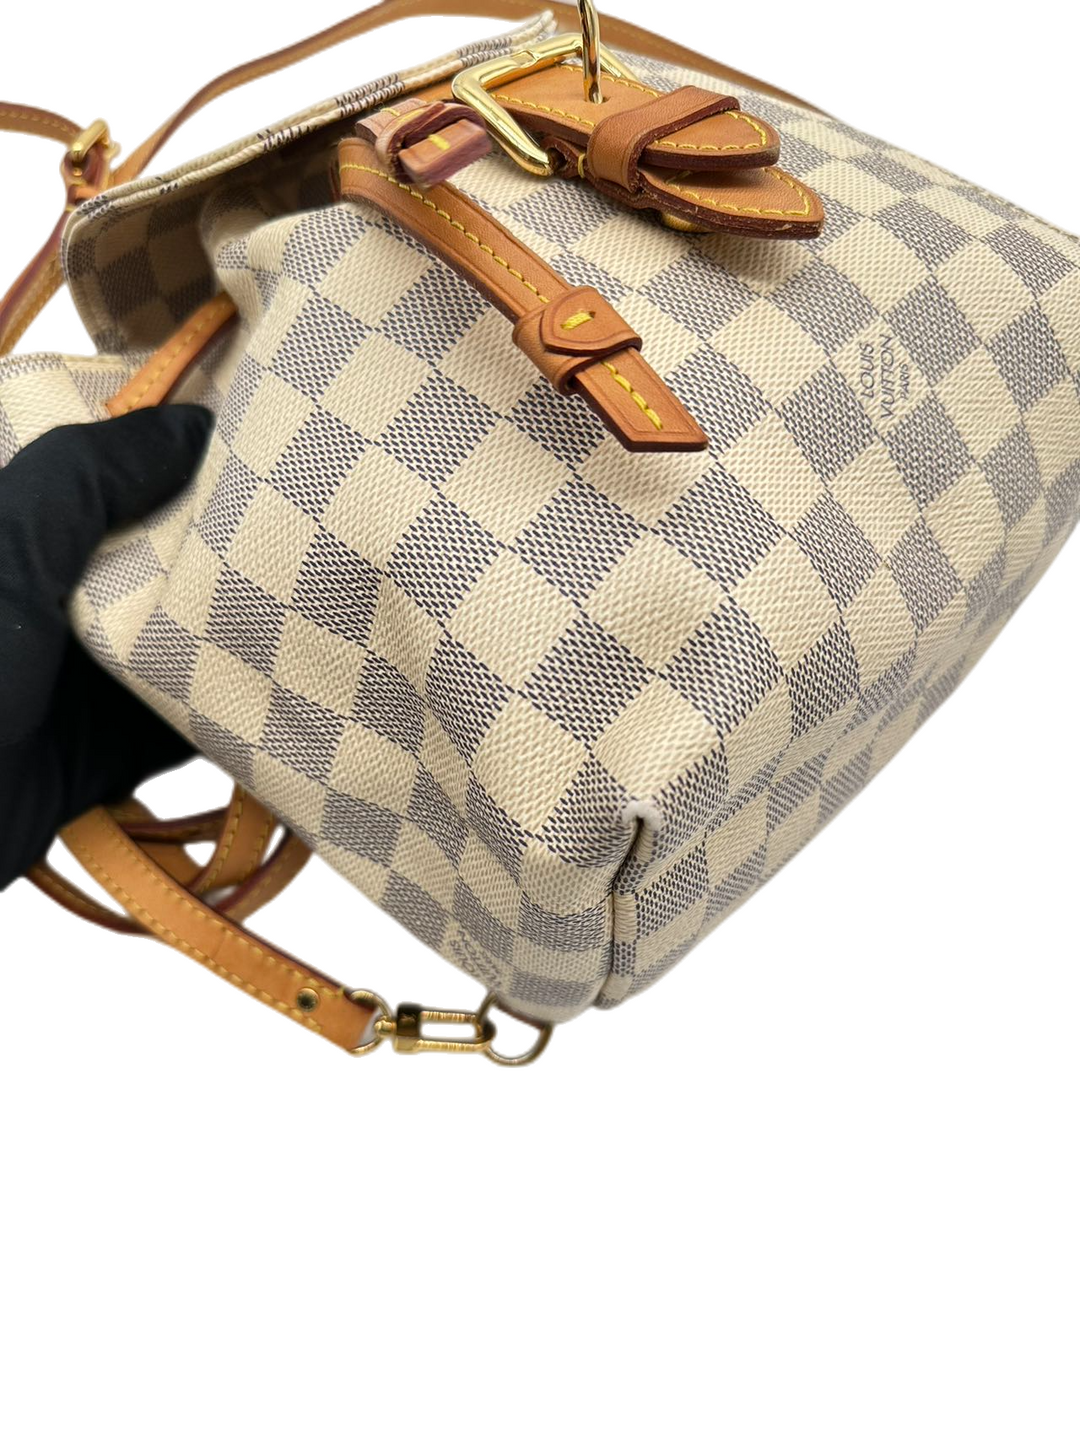 Preowned Louis Vuitton Sperone Backpack Damier Bb ($1,695